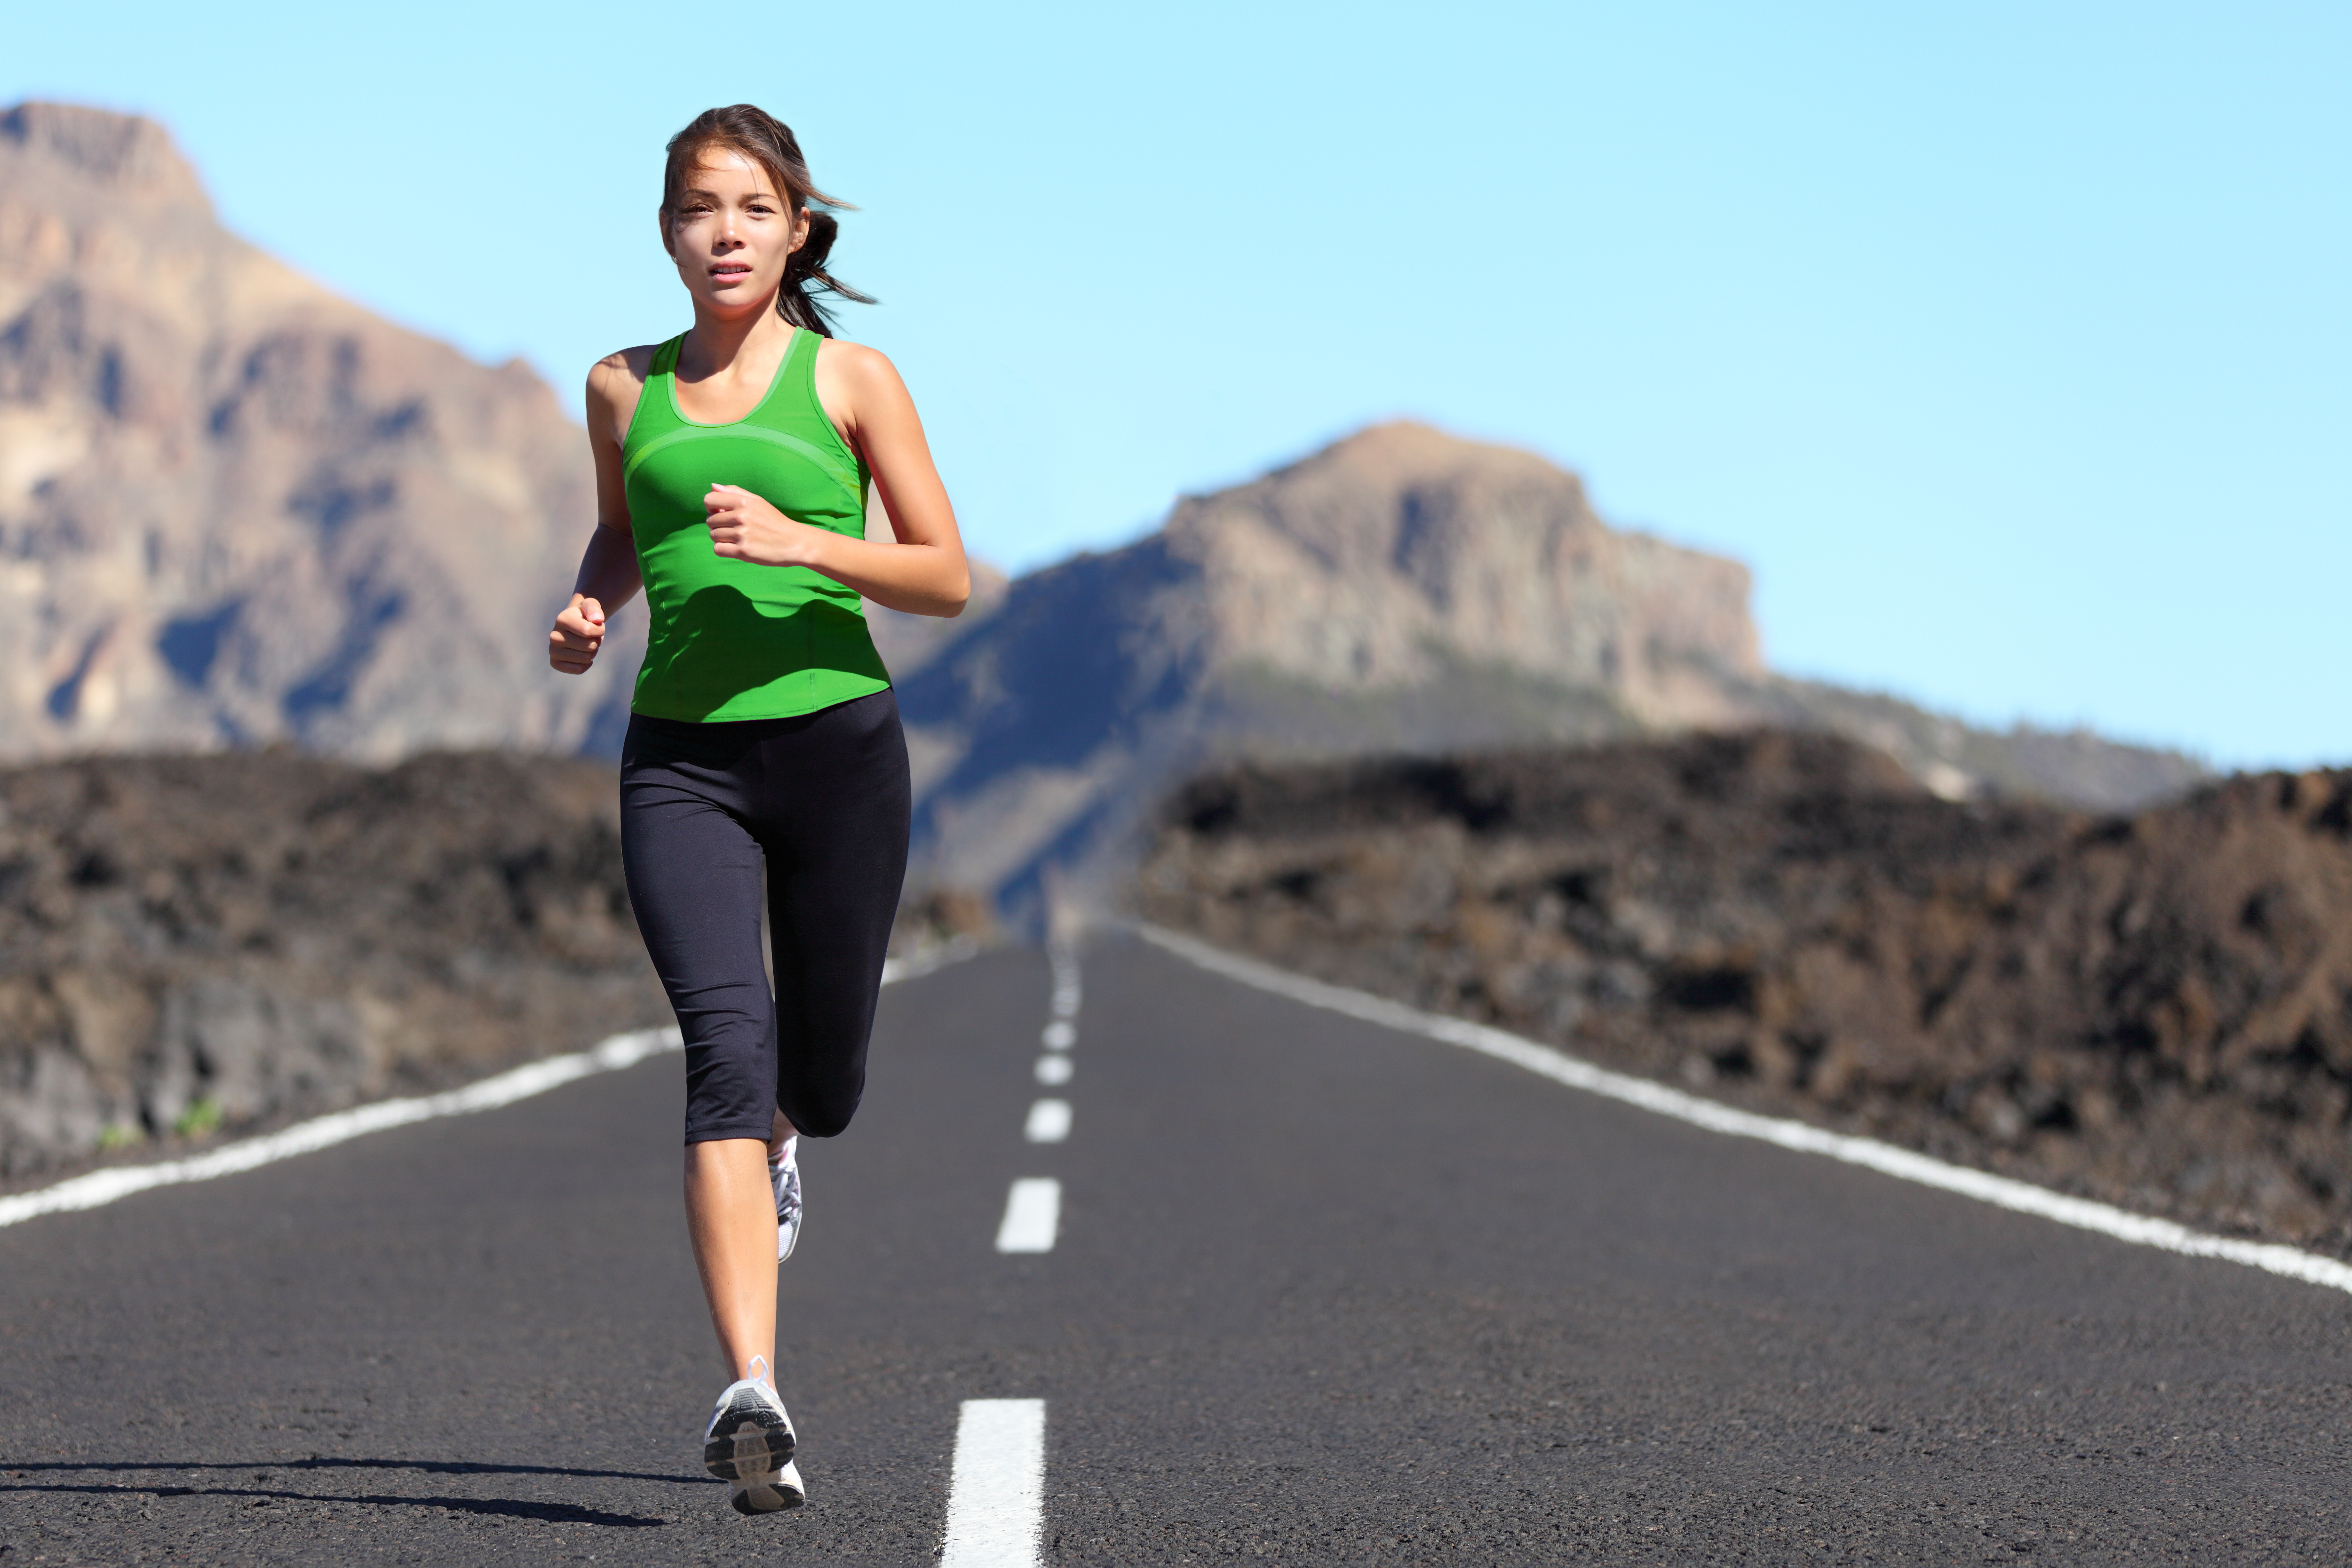 Running on an Empty Stomach – Yes or No?